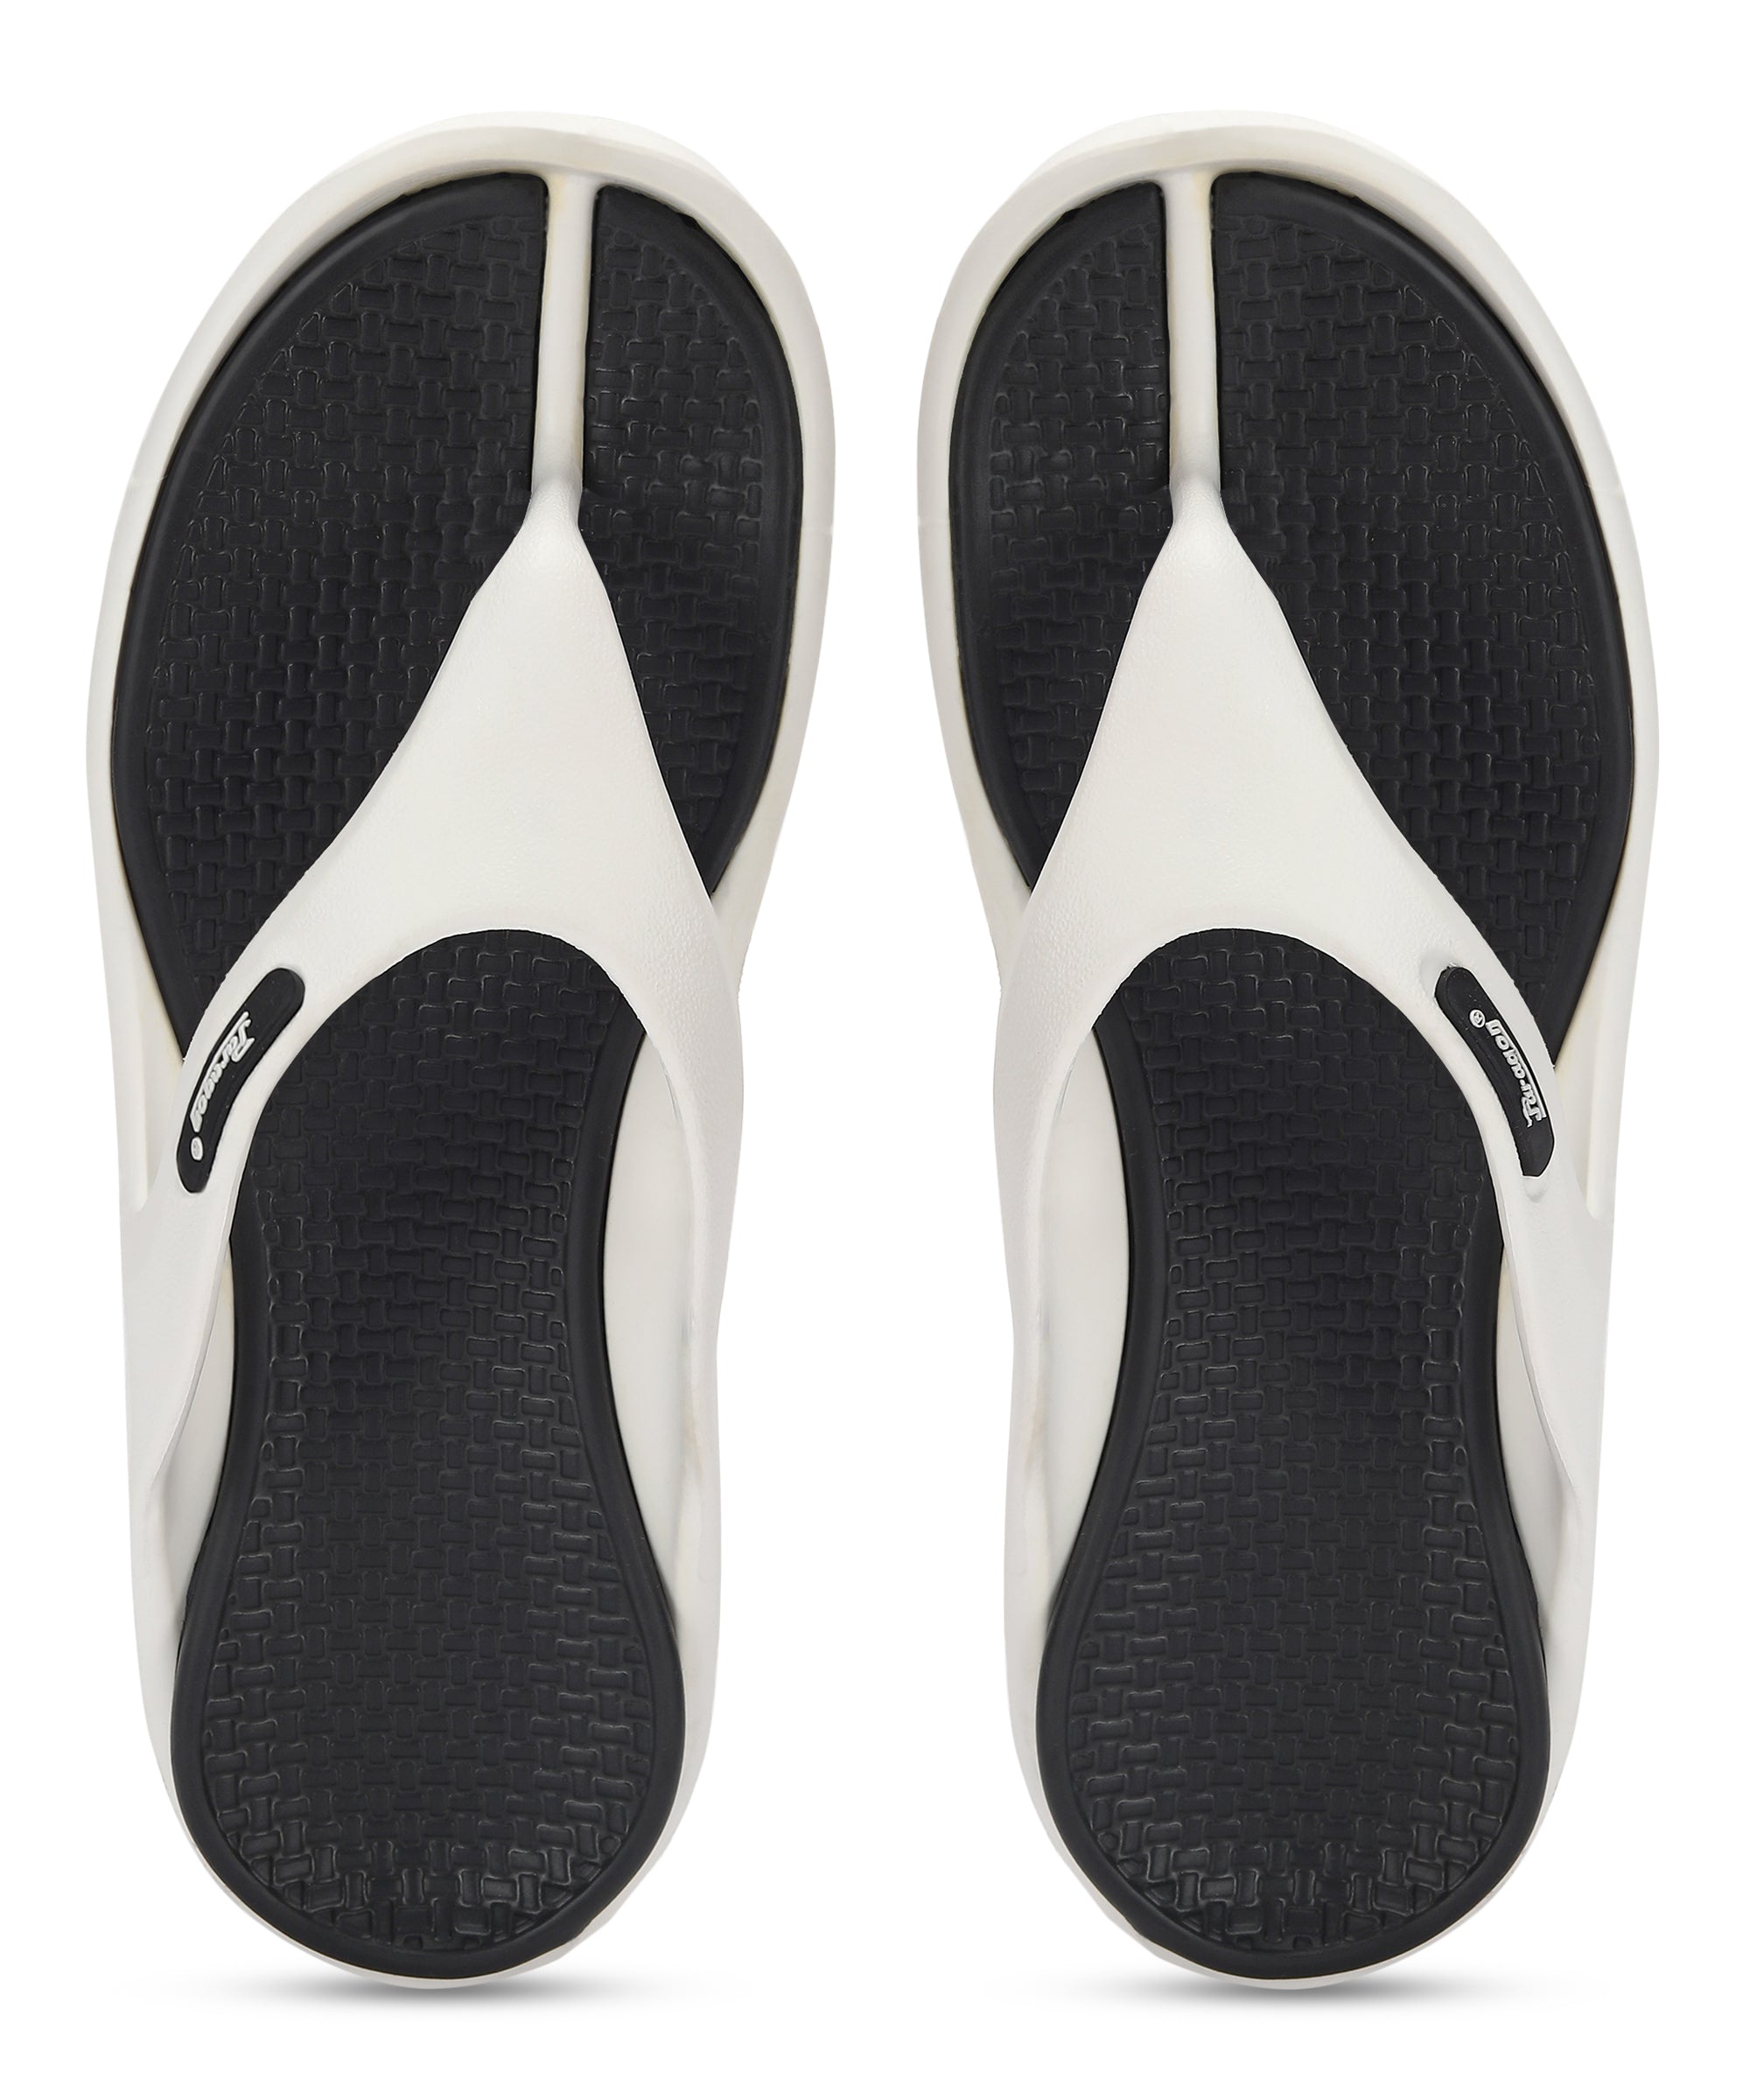 Paragon EVK3417G Men Slippers | Lightweight Flipflops for Indoor &amp; Outdoor | Casual &amp; Comfortable | Anti Skid sole | For Everyday Use